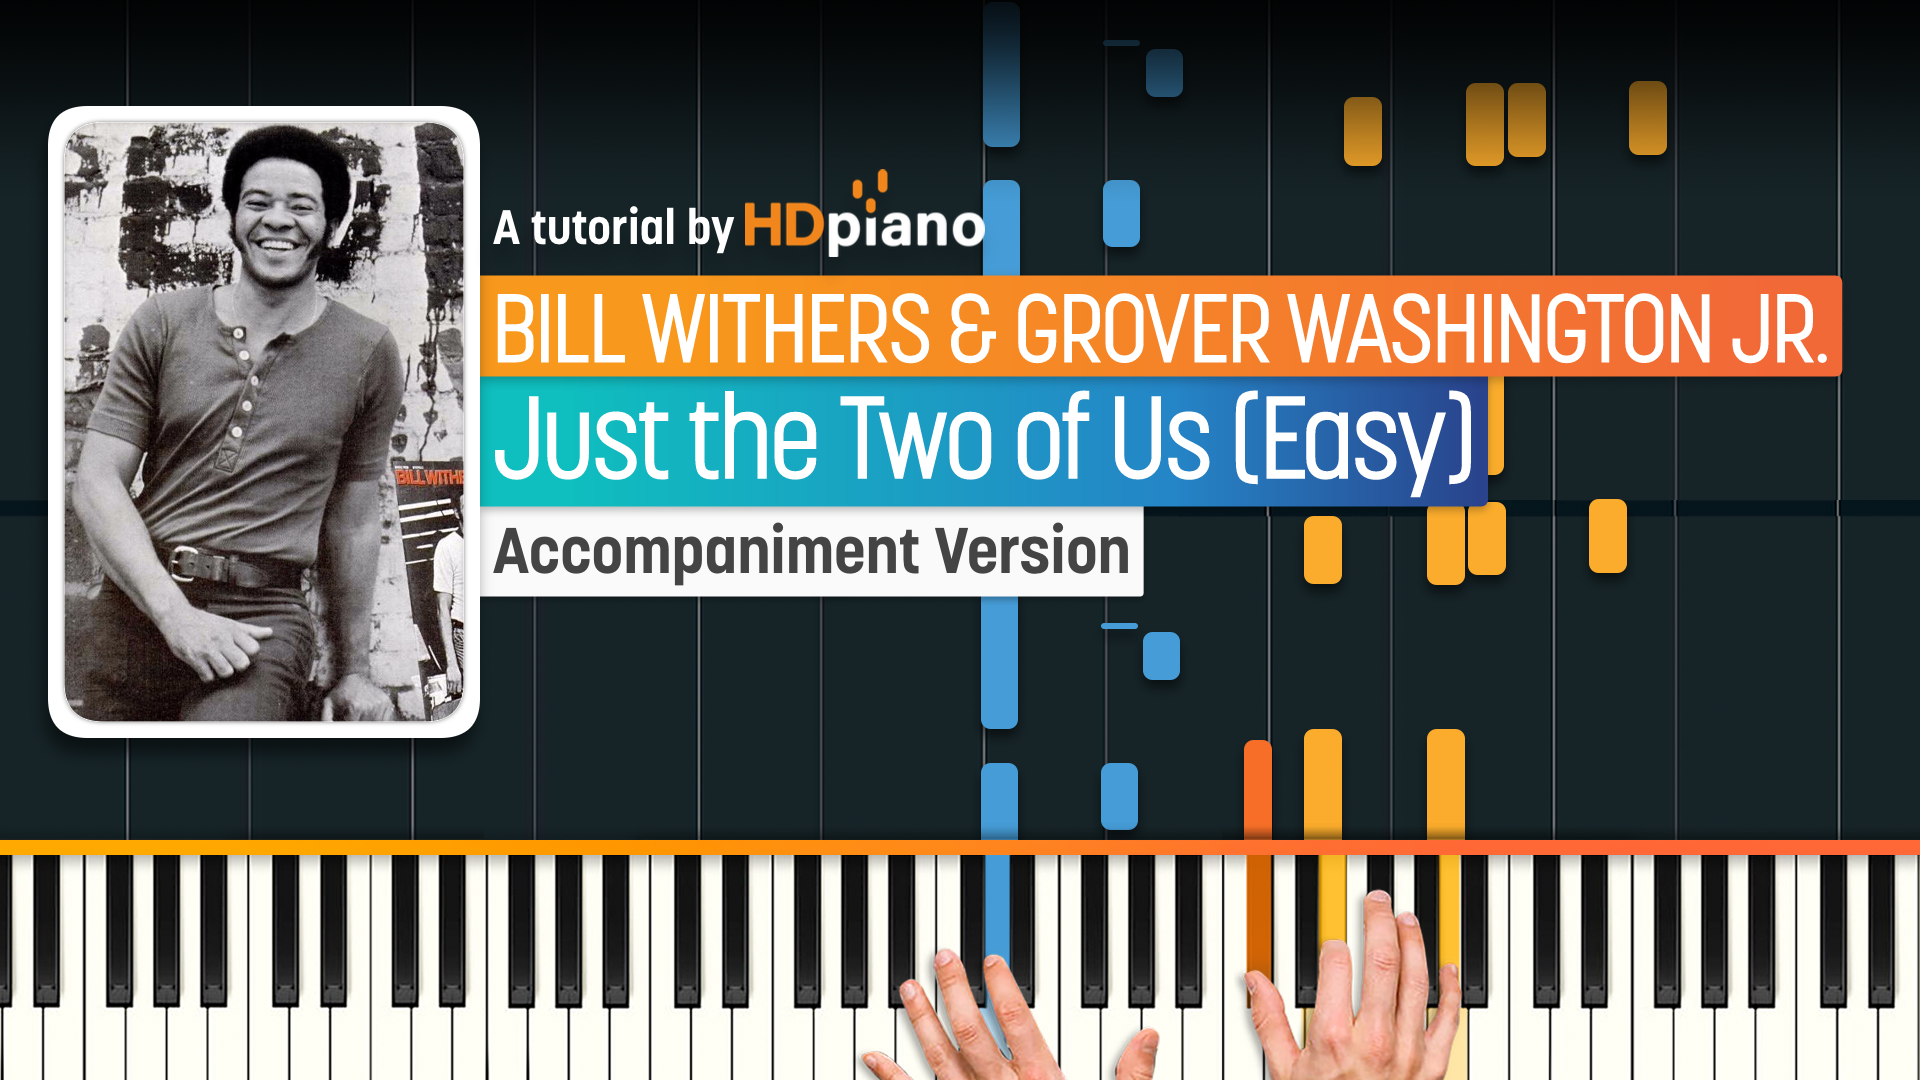 Just The Two Of Us - Grover Washington Jr - Score for Piano